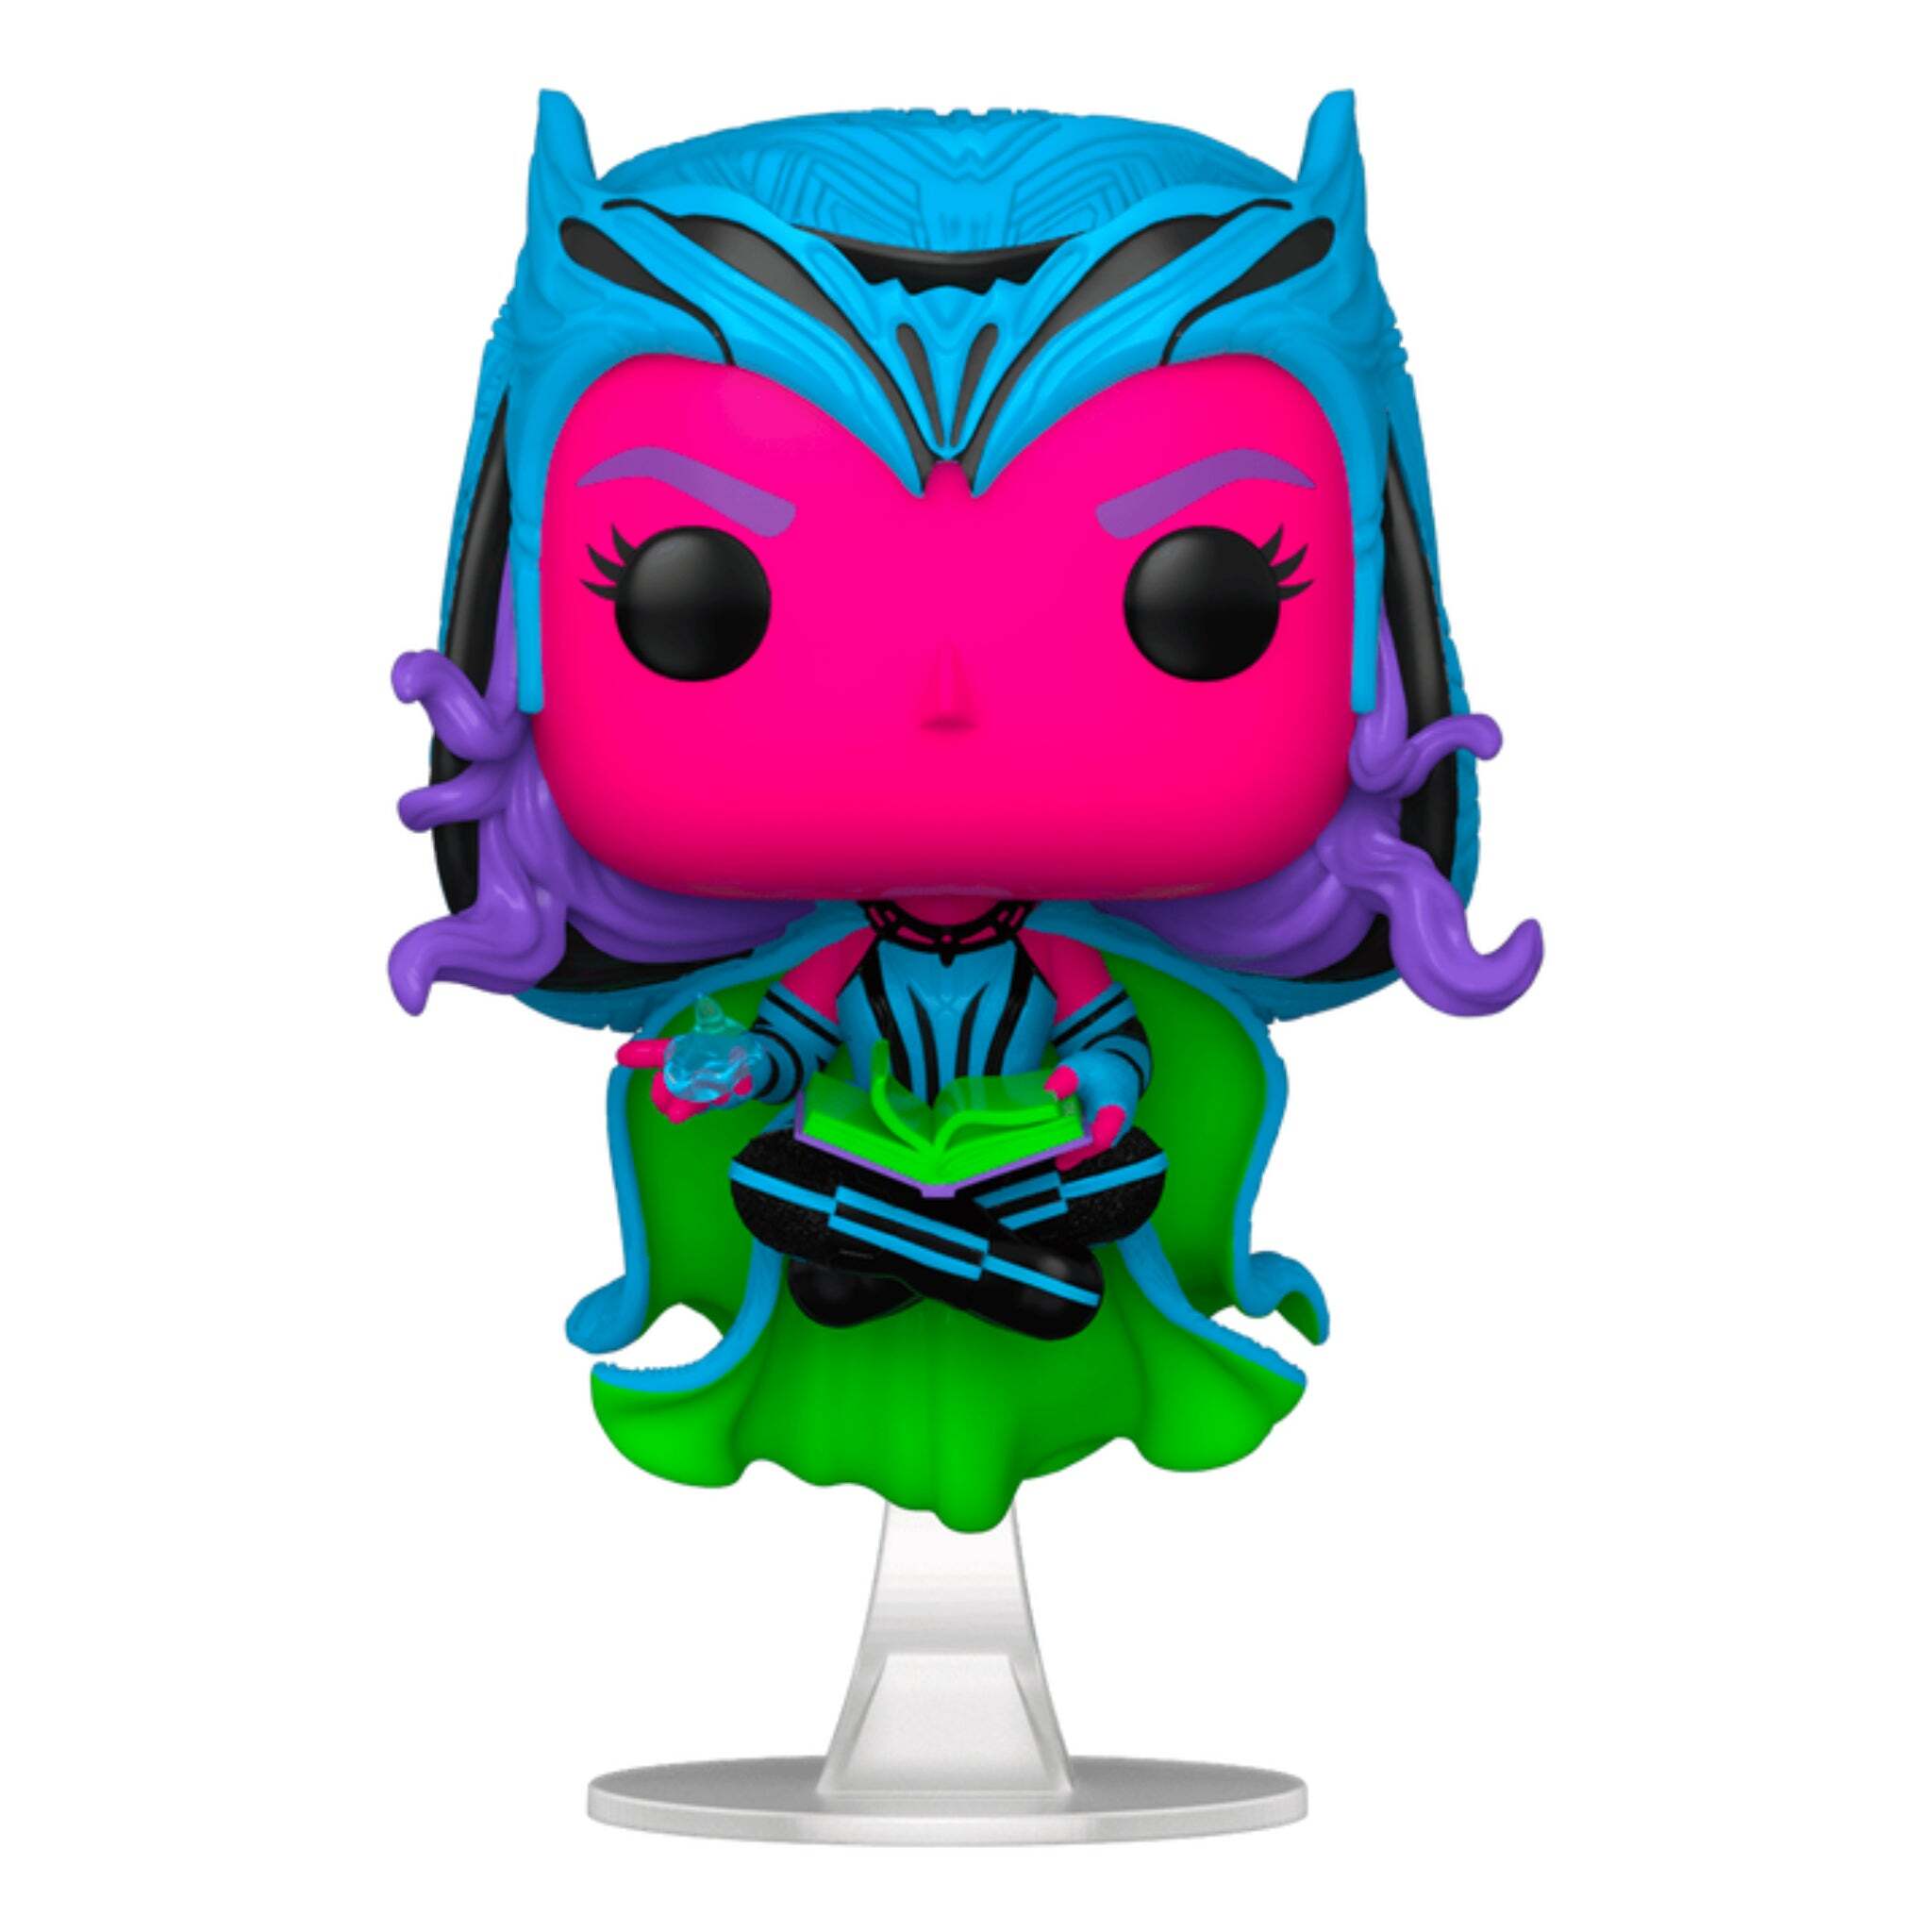 Scarlet Witch (Blacklight) Funko Pop! SPECIAL EDITION